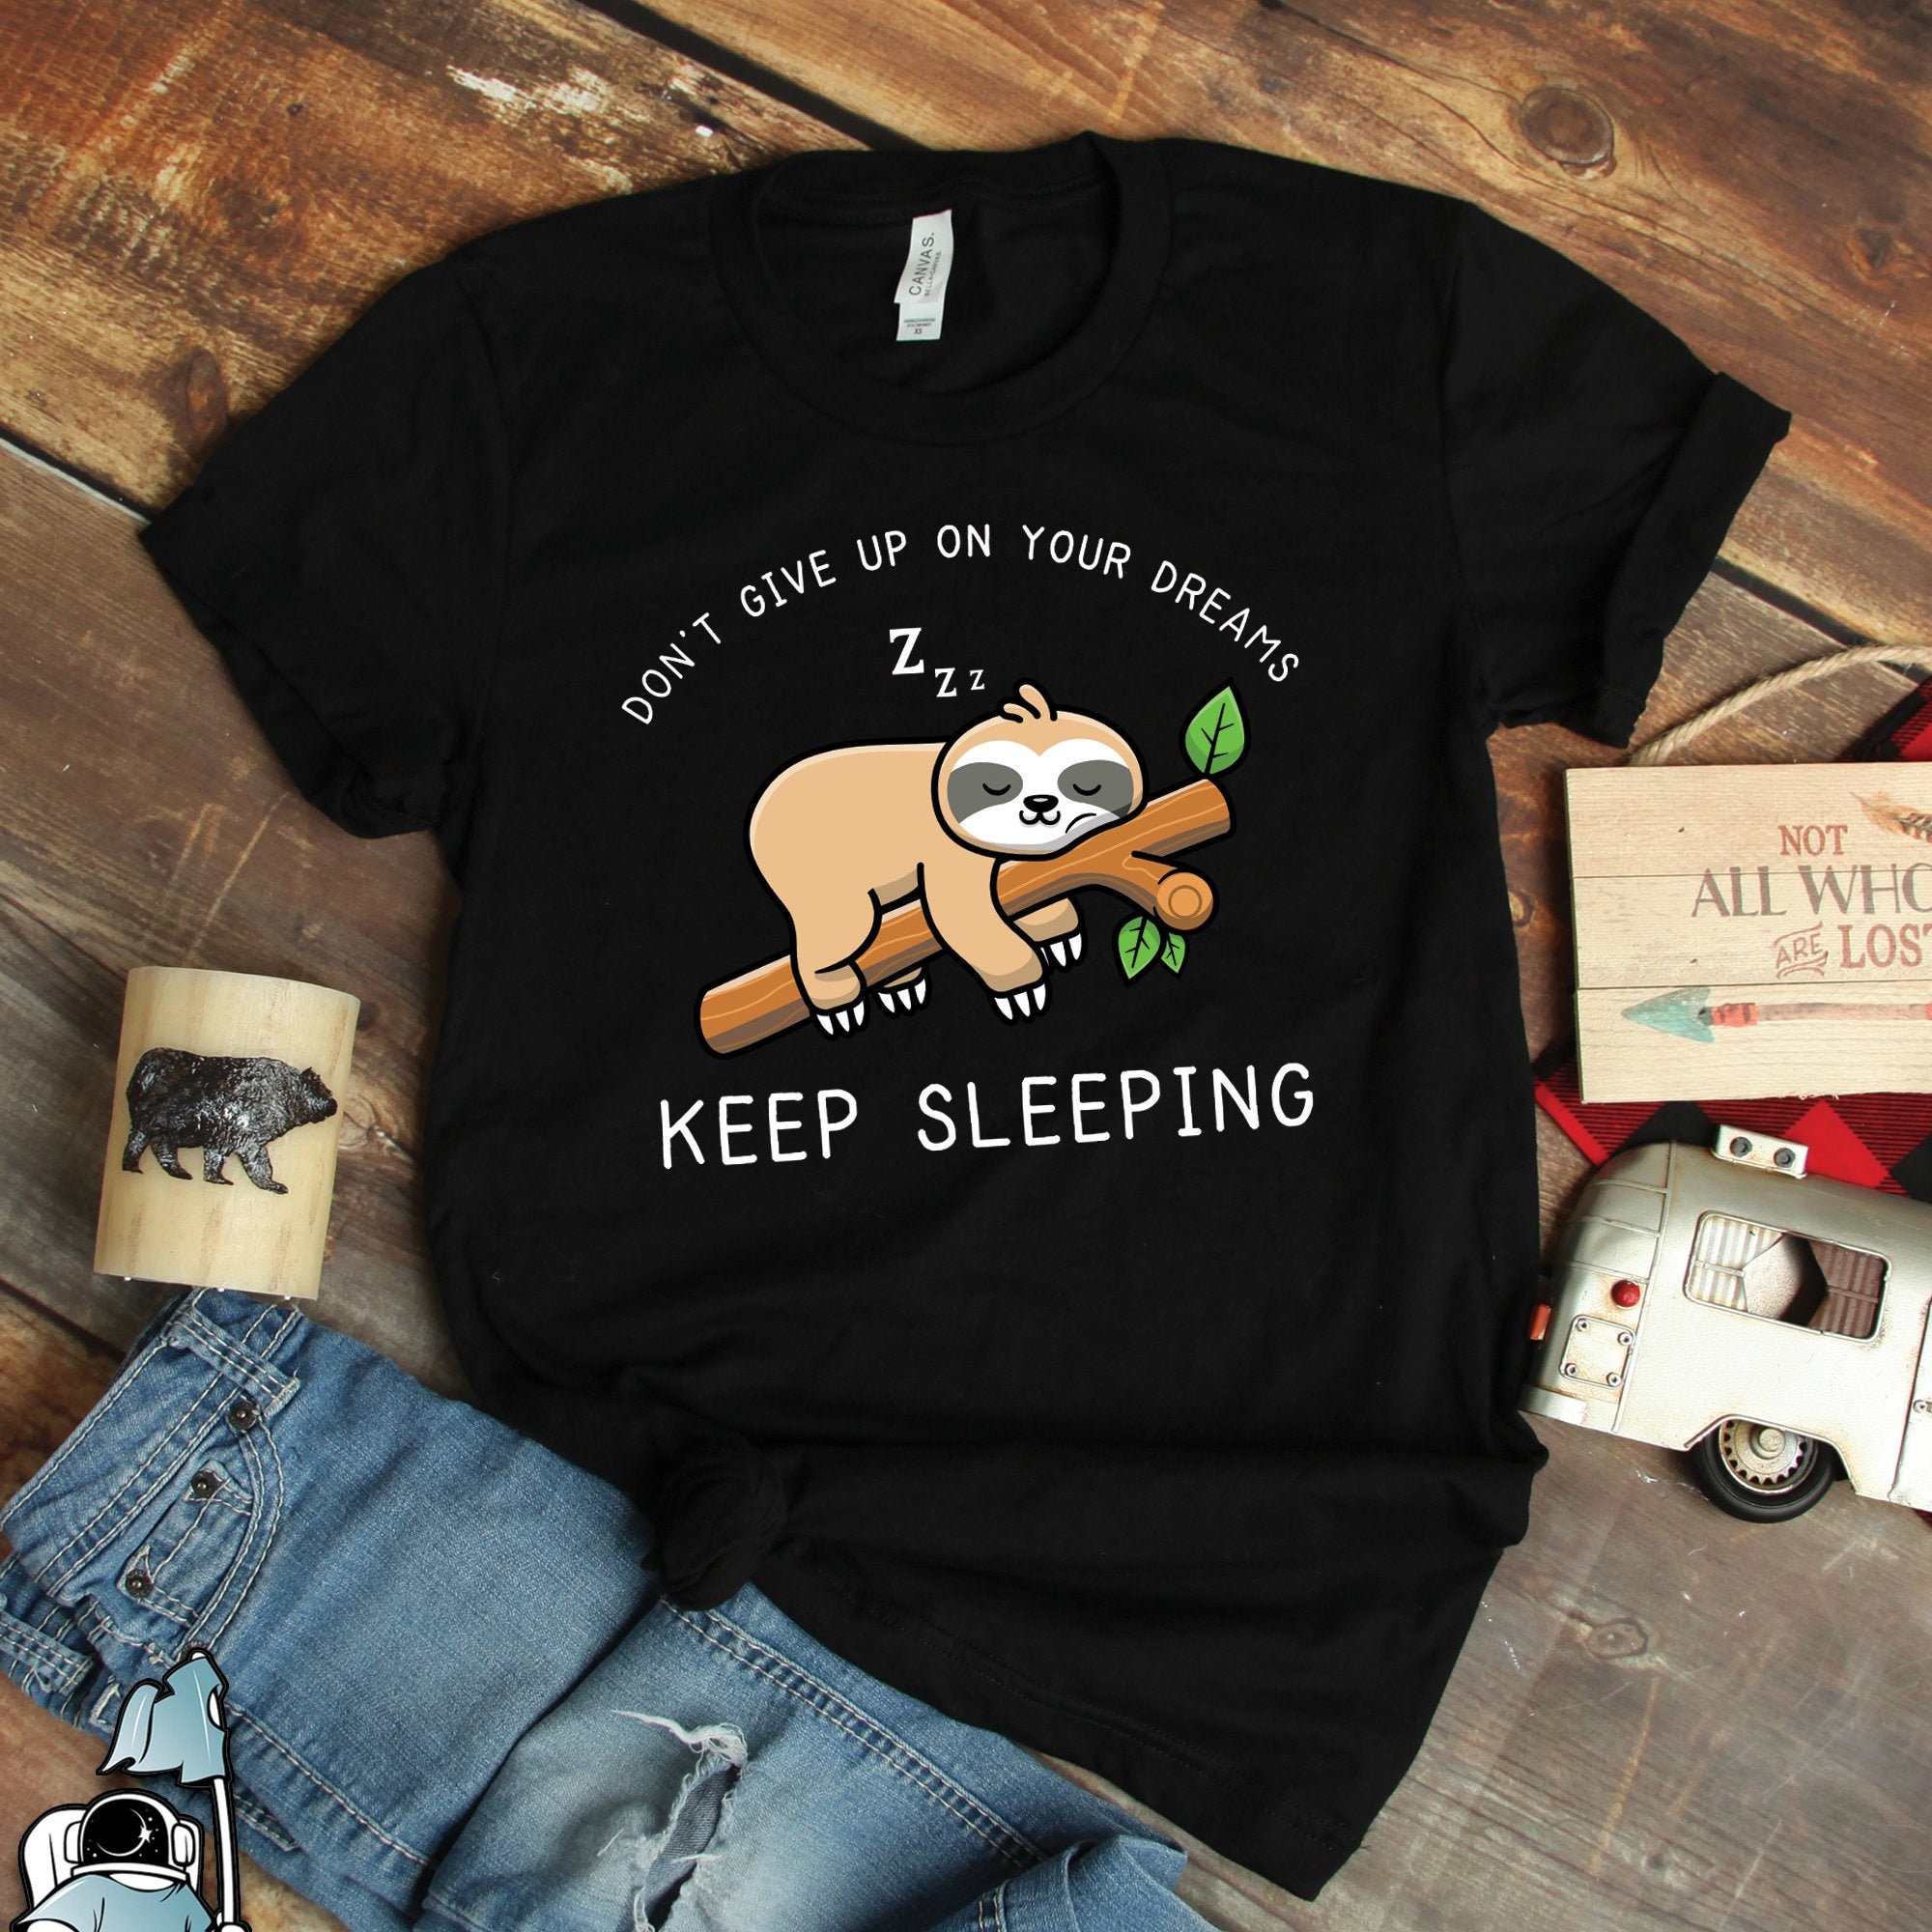 Discover Sloth Shirts, Keep Dreaming Shirt, Don't Give Up On Your Dreams, Sloth Gifts